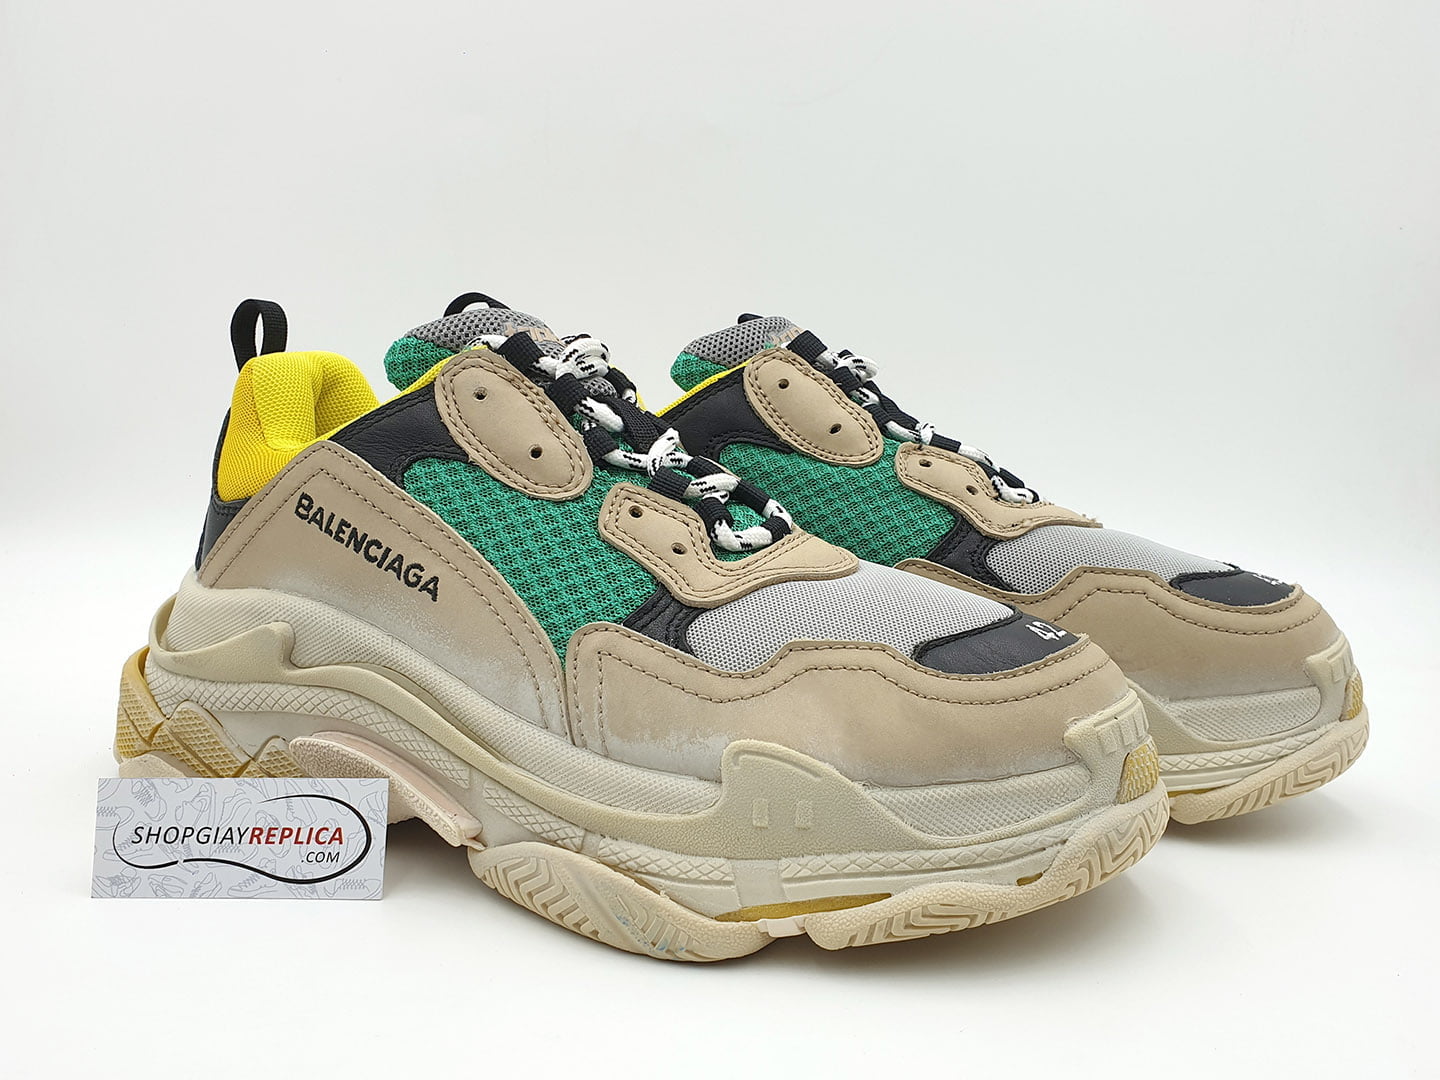 Balenciaga Triple S Trainers Buy now Best Quality